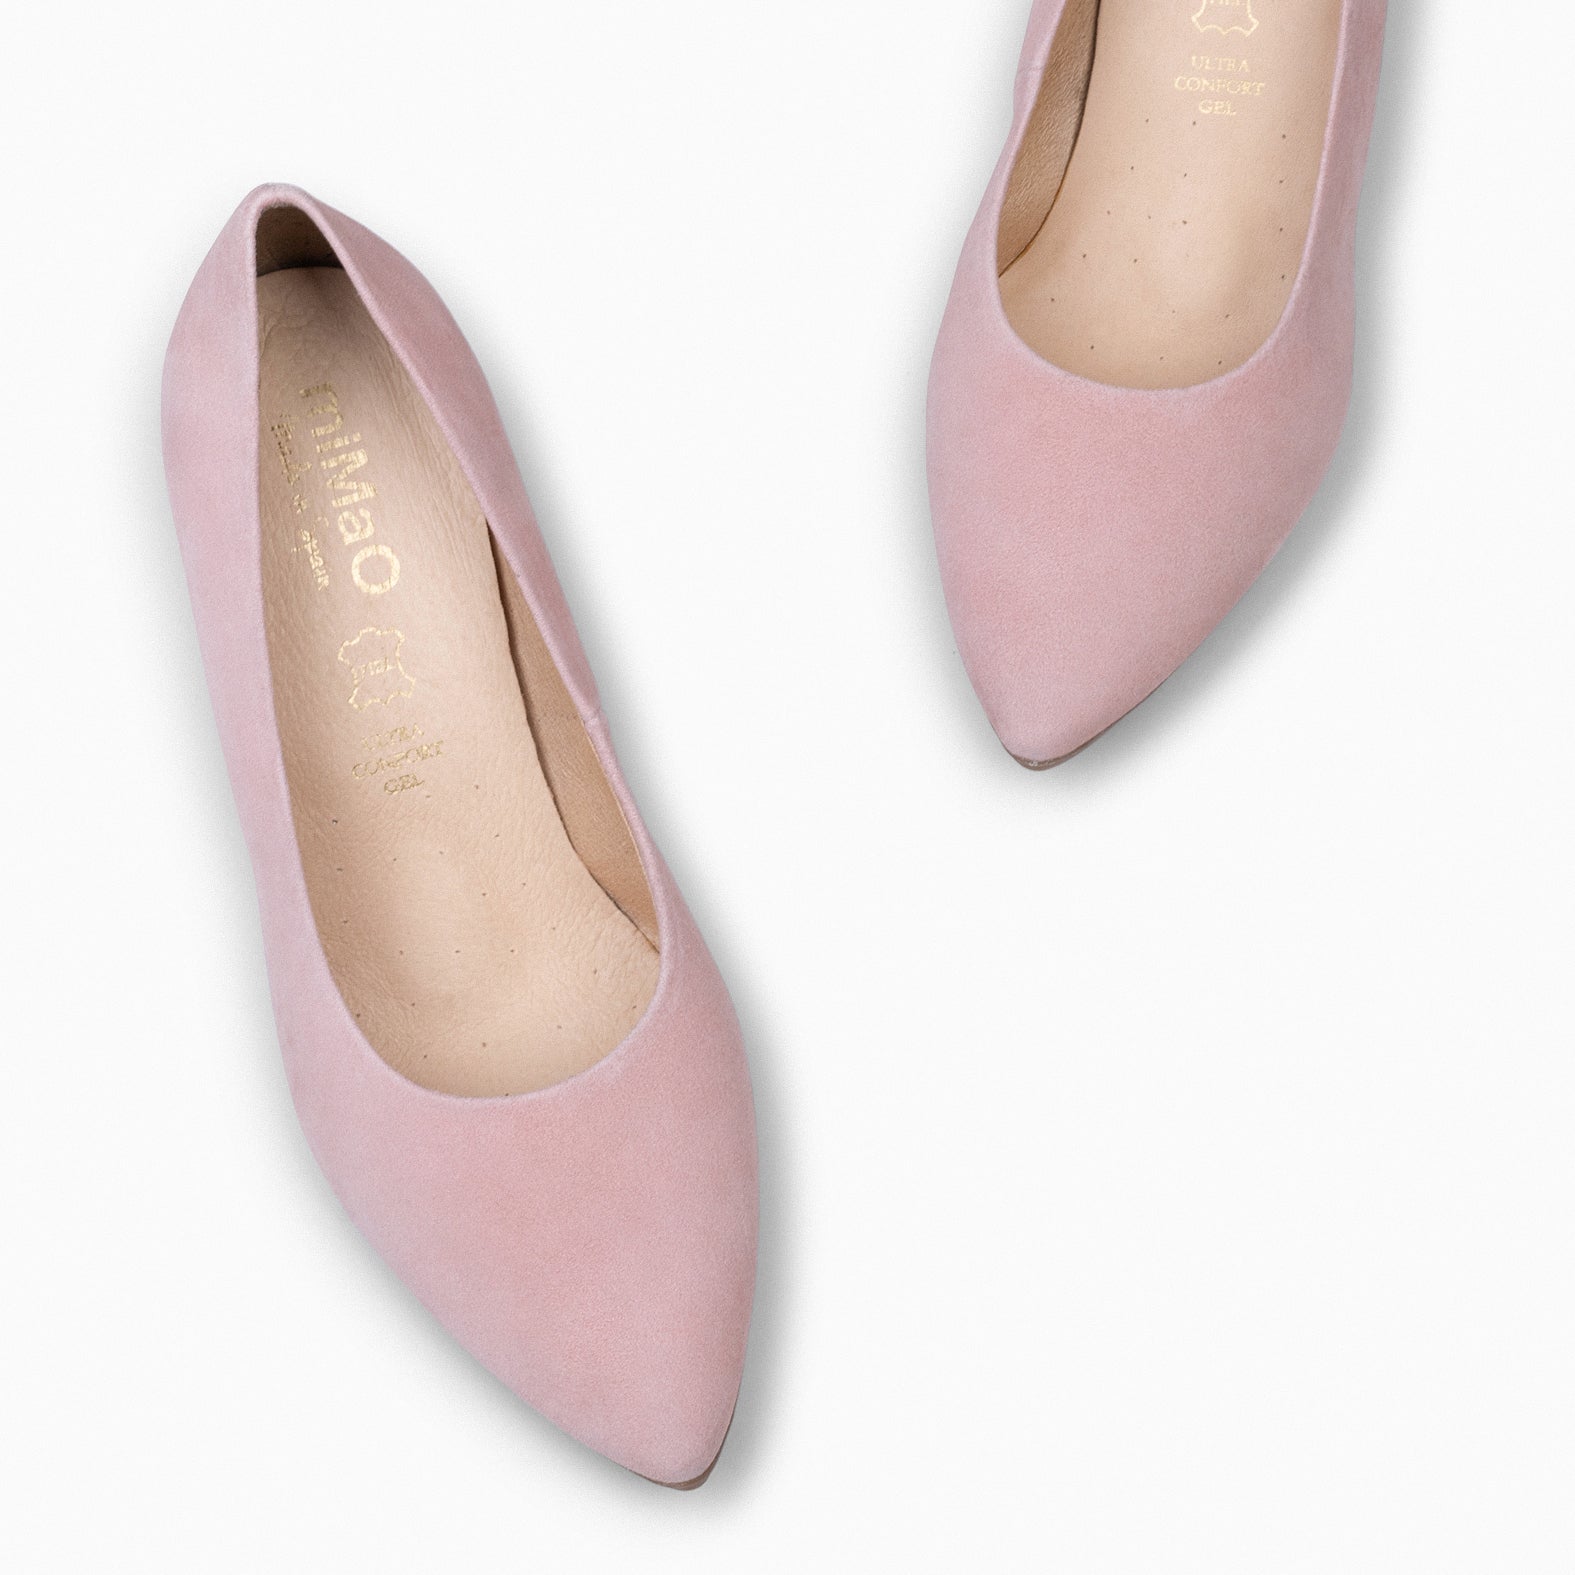 URBAN S – PALE PINK Suede Mid-Heeled Shoes 